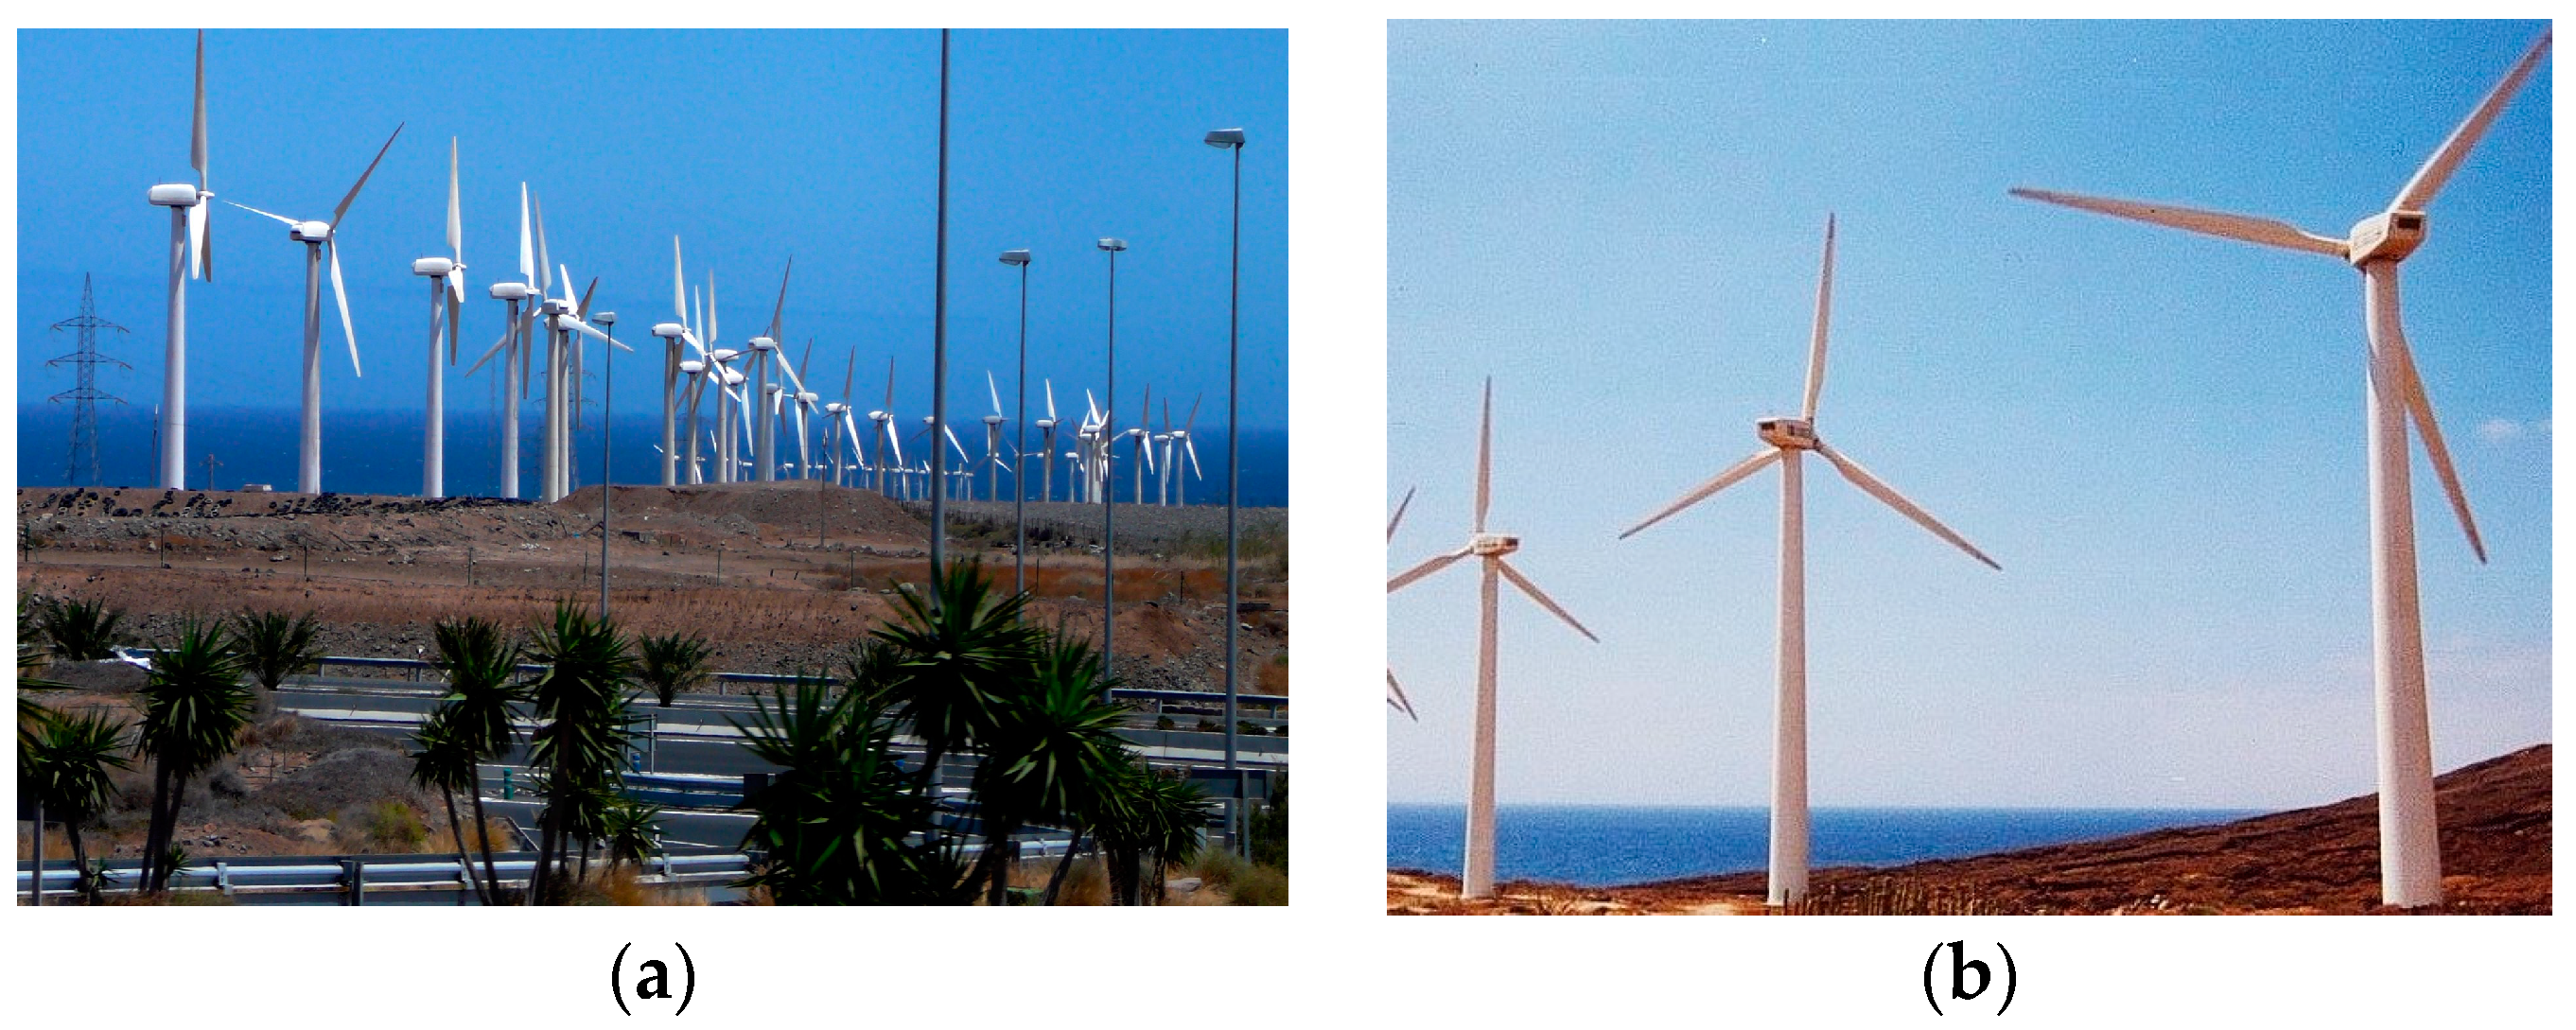 Energies | Free Full-Text | El Hierro Renewable Energy Hybrid System: A  Tough Compromise